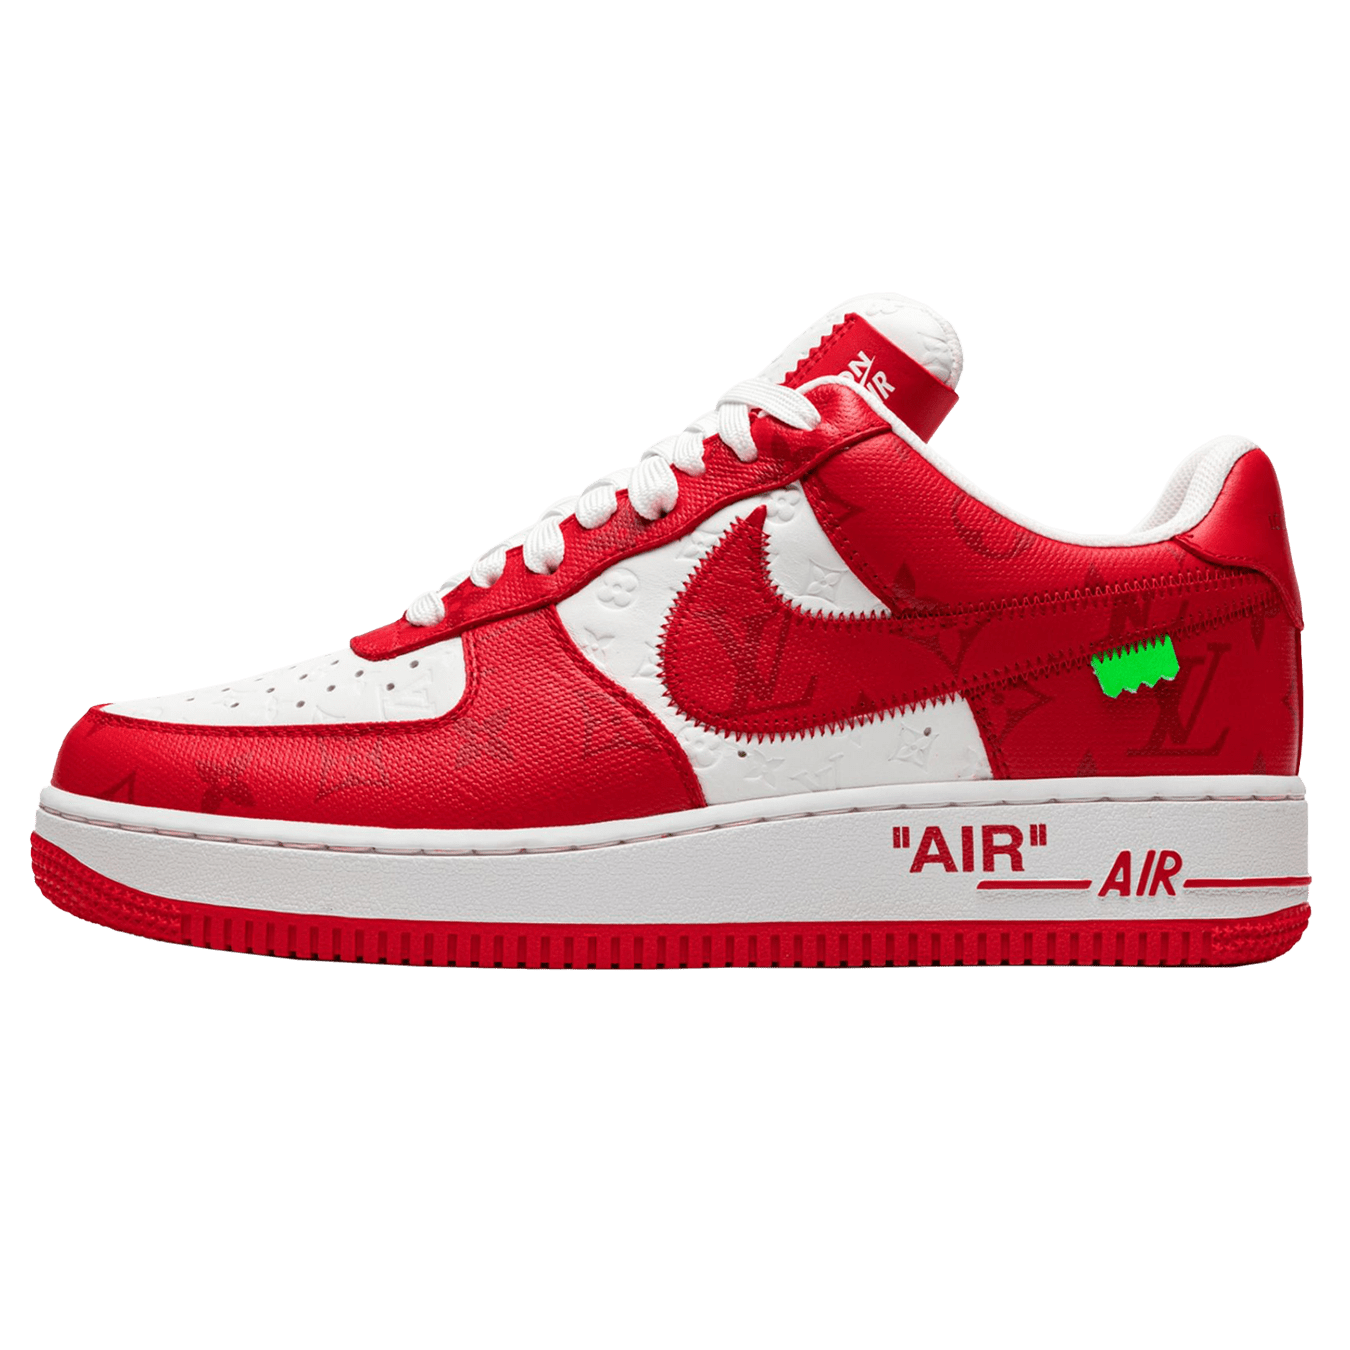 Louis Vuitton Nike Air Force 1 Low By Virgil Abloh White Comet Red ...